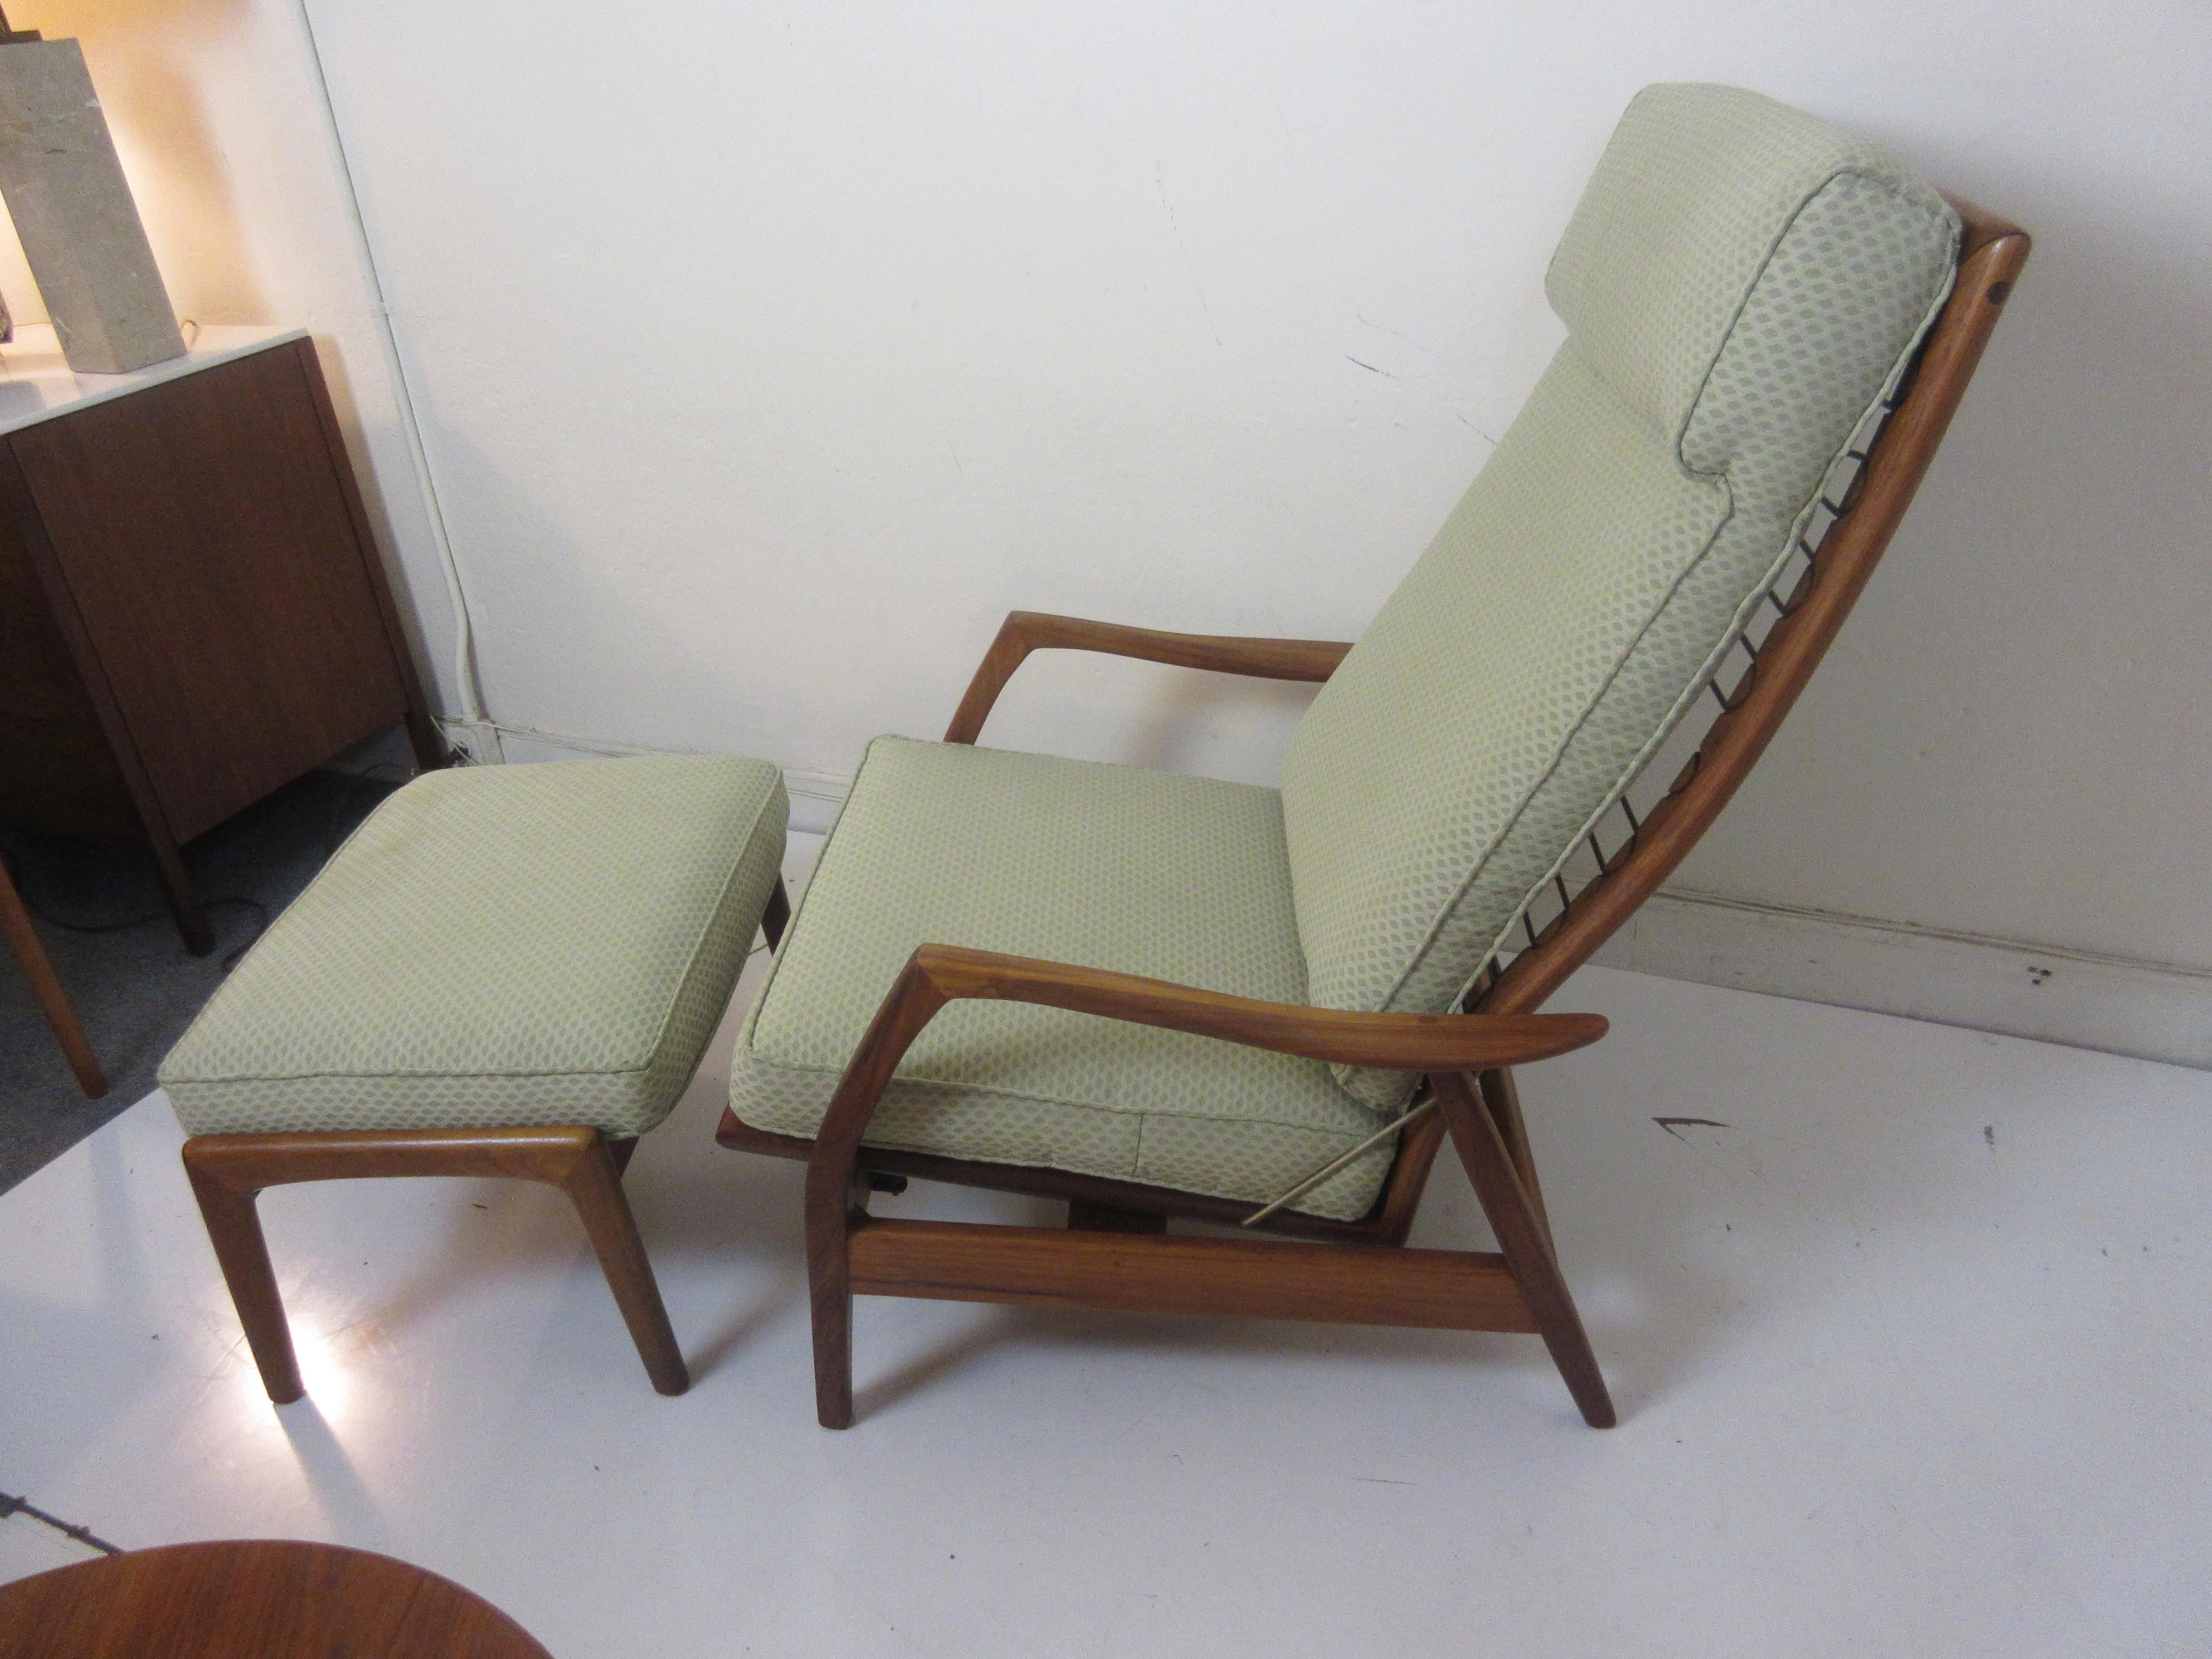 DUX teak lounge chair and ottoman with three positions and free rocking feature activated by the knob on lower right side of chair. Ottoman also has a slanted or flat adjustment shown in pictures. Frame has been refinished. Fabric is light green